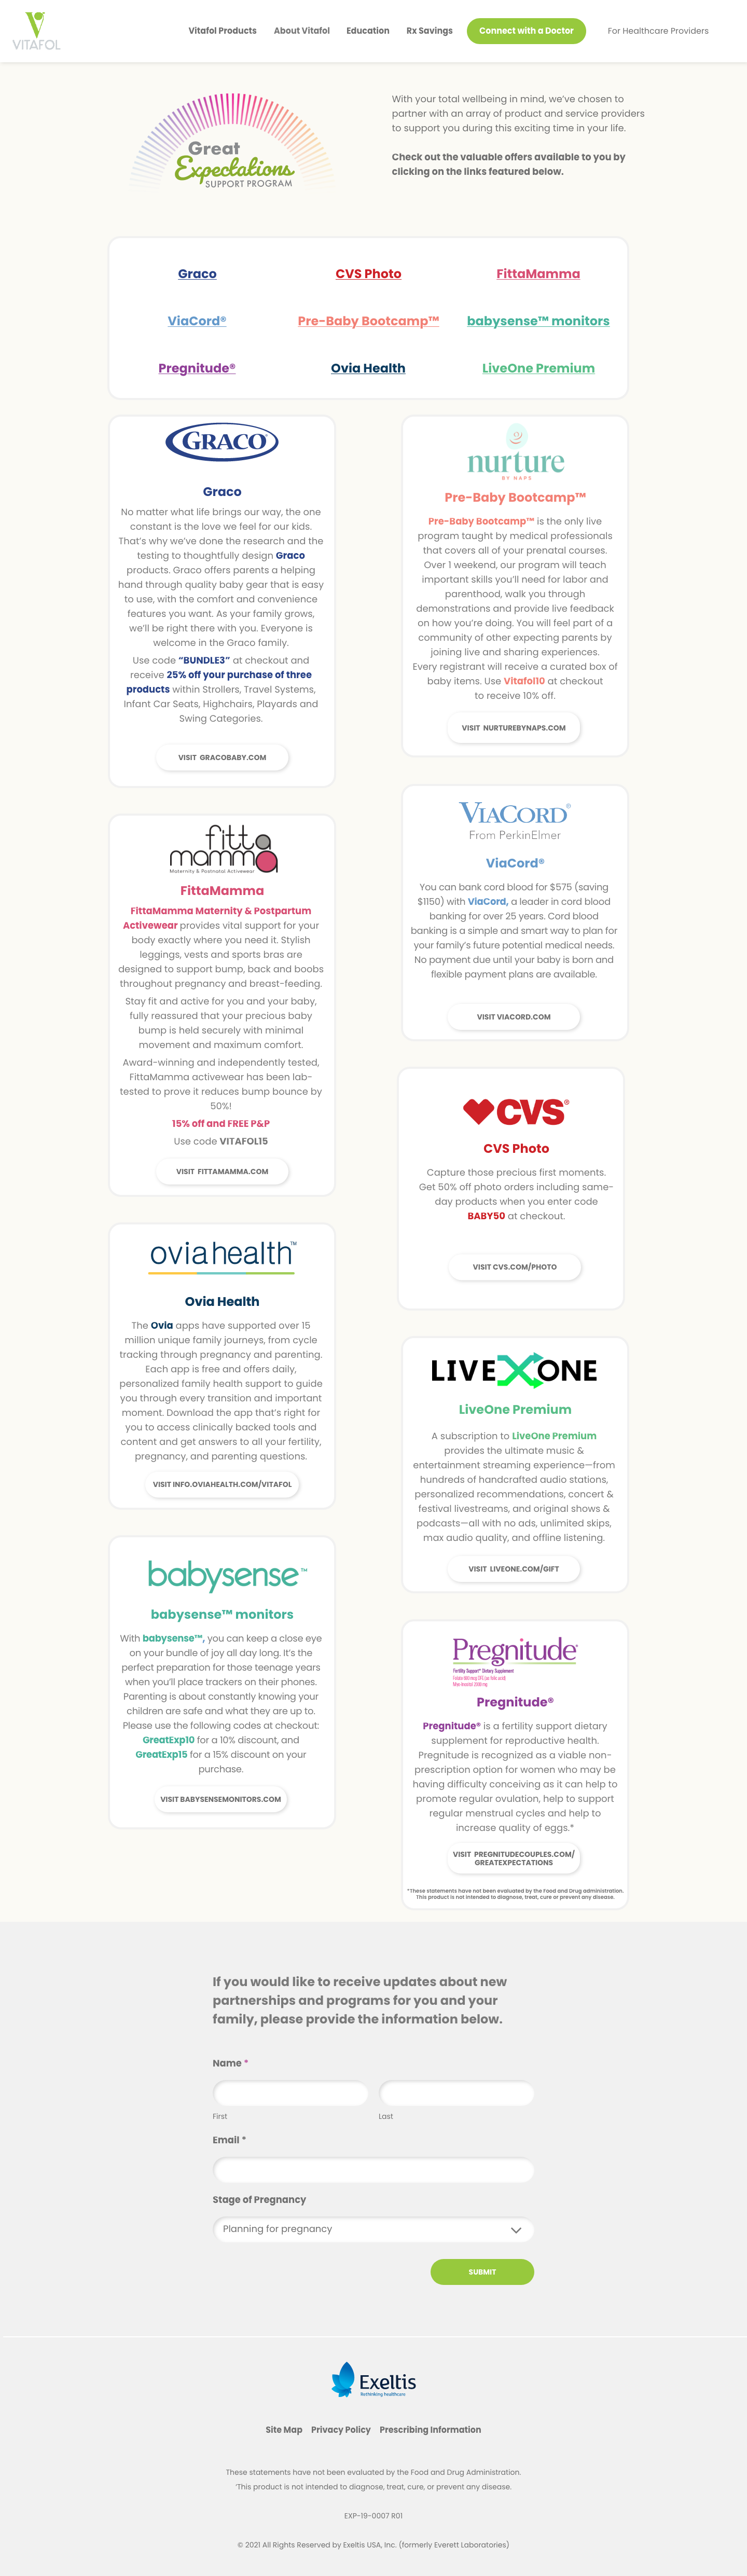 Screenshot of Vitafol Great Expectations Support Program website. With your total wellbeing in mind, we’ve chosen to partner with an array of product and service providers to support you during this exciting time in your life. Check out the valuable offers available to you by clicking on the links featured below.